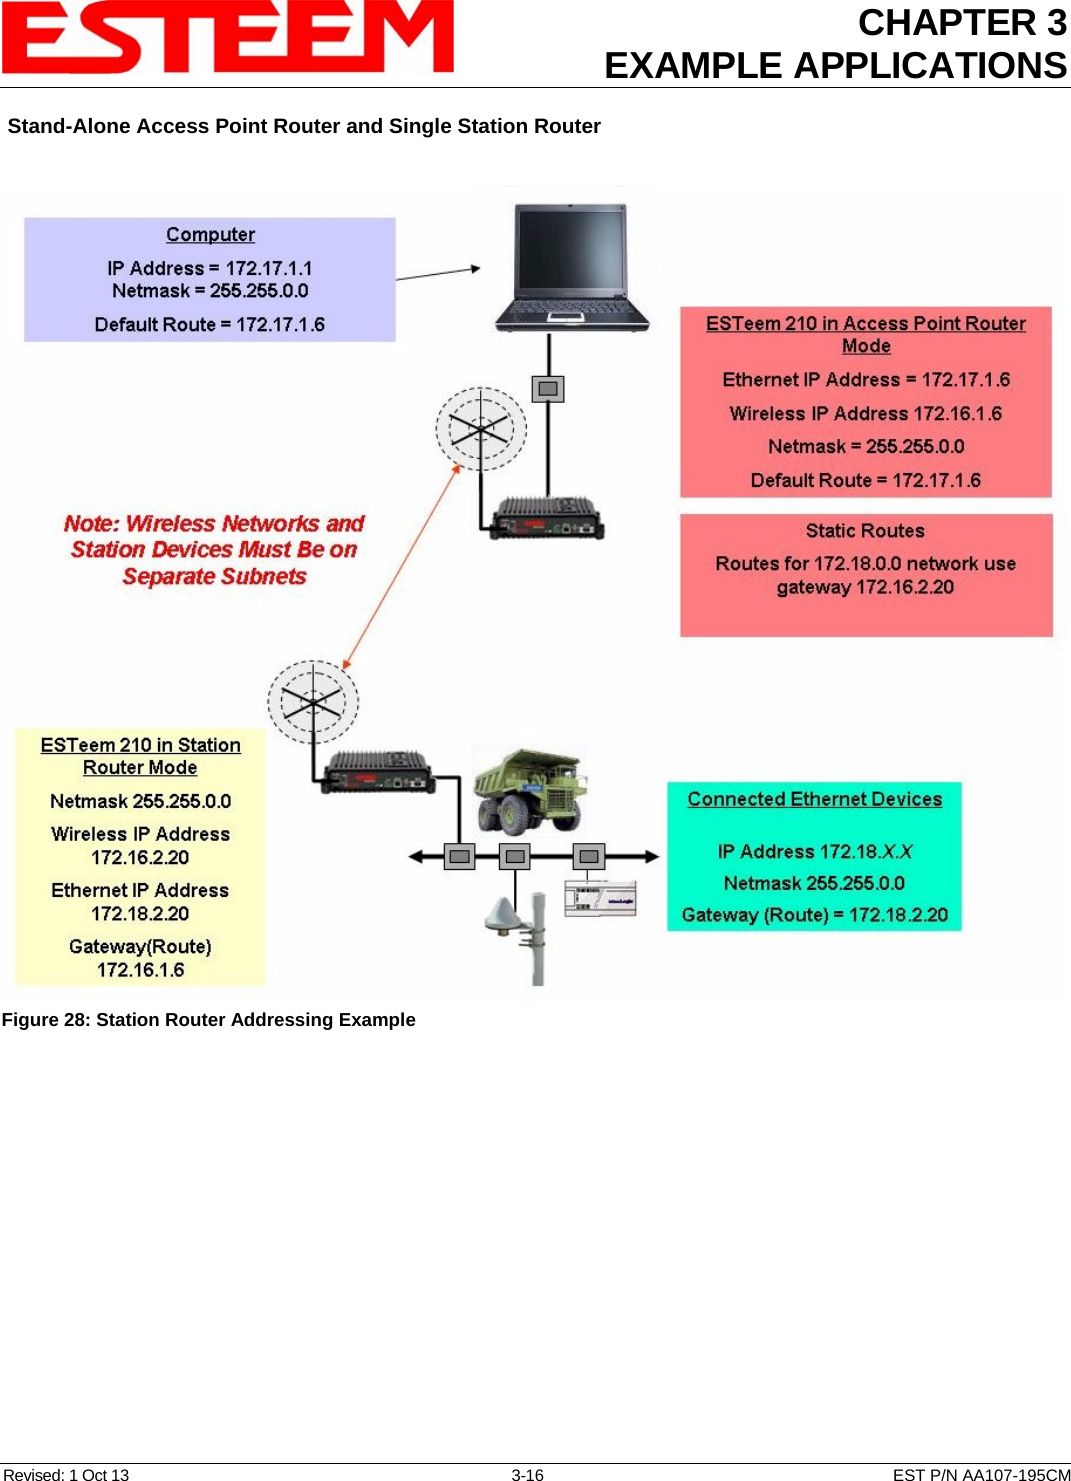 CHAPTER 3 EXAMPLE APPLICATIONS   Stand-Alone Access Point Router and Single Station Router   Revised: 1 Oct 13  3-16  EST P/N AA107-195CM Figure 28: Station Router Addressing Example  Static Routes  Routes for 172.18.0.0 network use gateway 172.16.2.20  Note: Wireless Networks and Station Devices Must Be on Separate Subnets ESTeem 195C/M in Access Point Router Mode Ethernet IP Address = 172.17.1.6 Wireless IP Address 172.16.1.6 Netmask = 255.255.0.0 Default Route = 172.17.1.6  ESTeem 195C/M in Station Router Mode Netmask 255.255.0.0 Wireless IP Address 172.16.2.20 Ethernet IP Address 172.18.2.20 Gateway(Route) 172.16.1.6 Computer  IP Address = 172.17.1.1 Netmask = 255.255.0.0 Default Route = 172.17.1.6 Connected Ethernet Devices  IP Address 172.18.X.X Netmask 255.255.0.0 Gateway (Route) = 172.18.2.20 